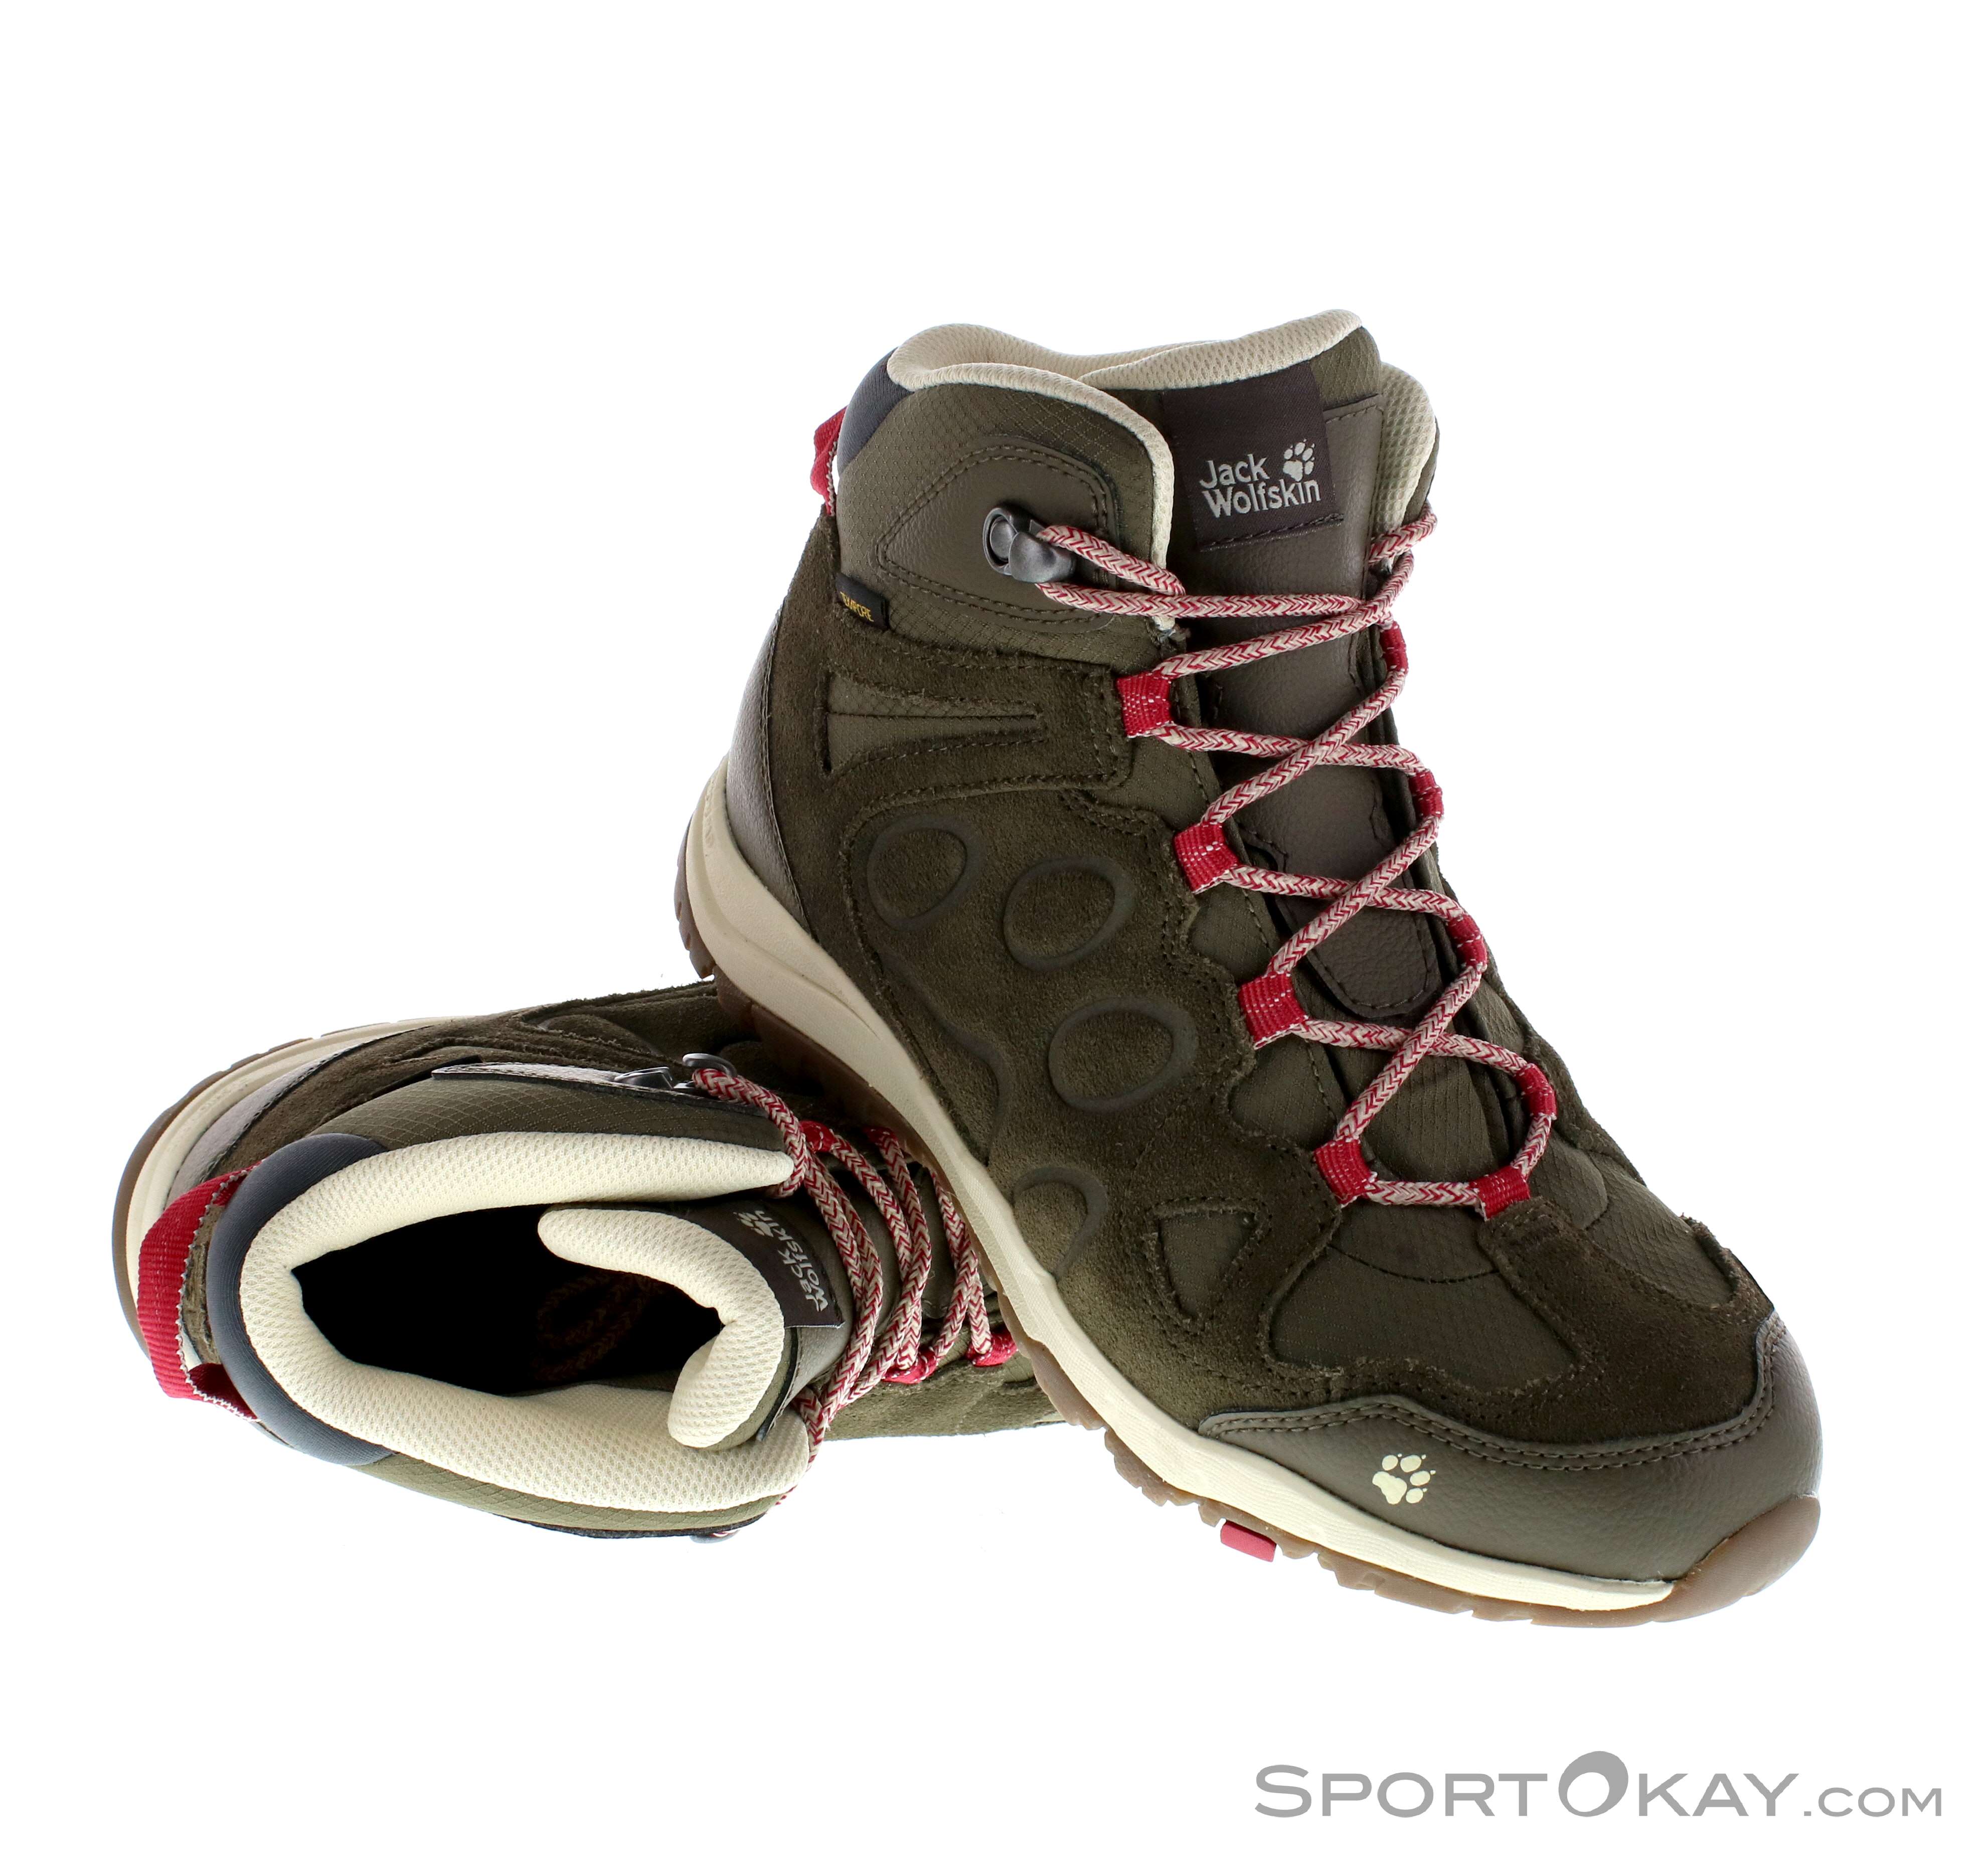 familie lid zoon Jack Wolfskin Walking Boots Greece, SAVE 35% - icarus.photos